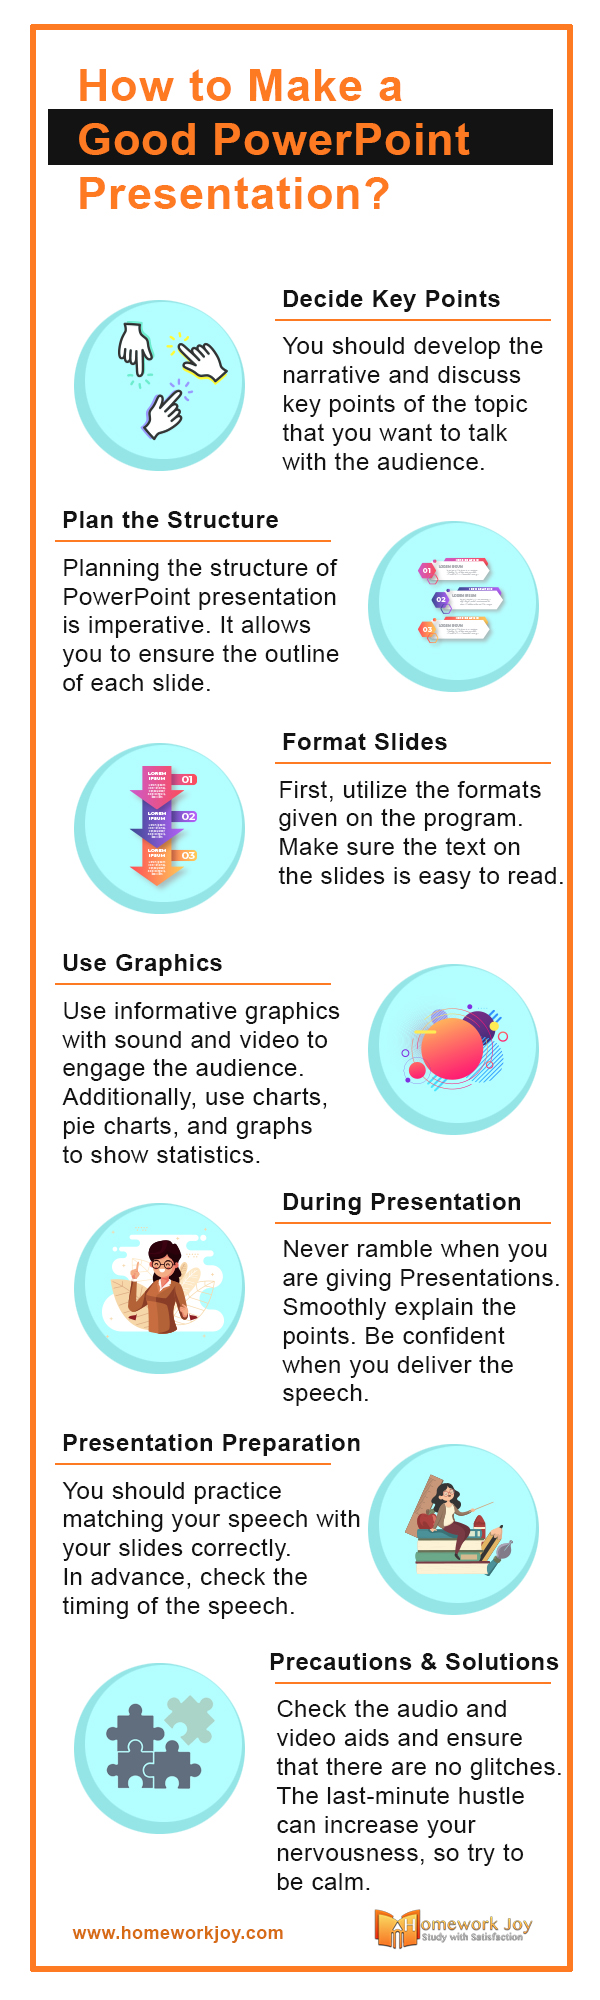 How to Make a Good PowerPoint Presentation